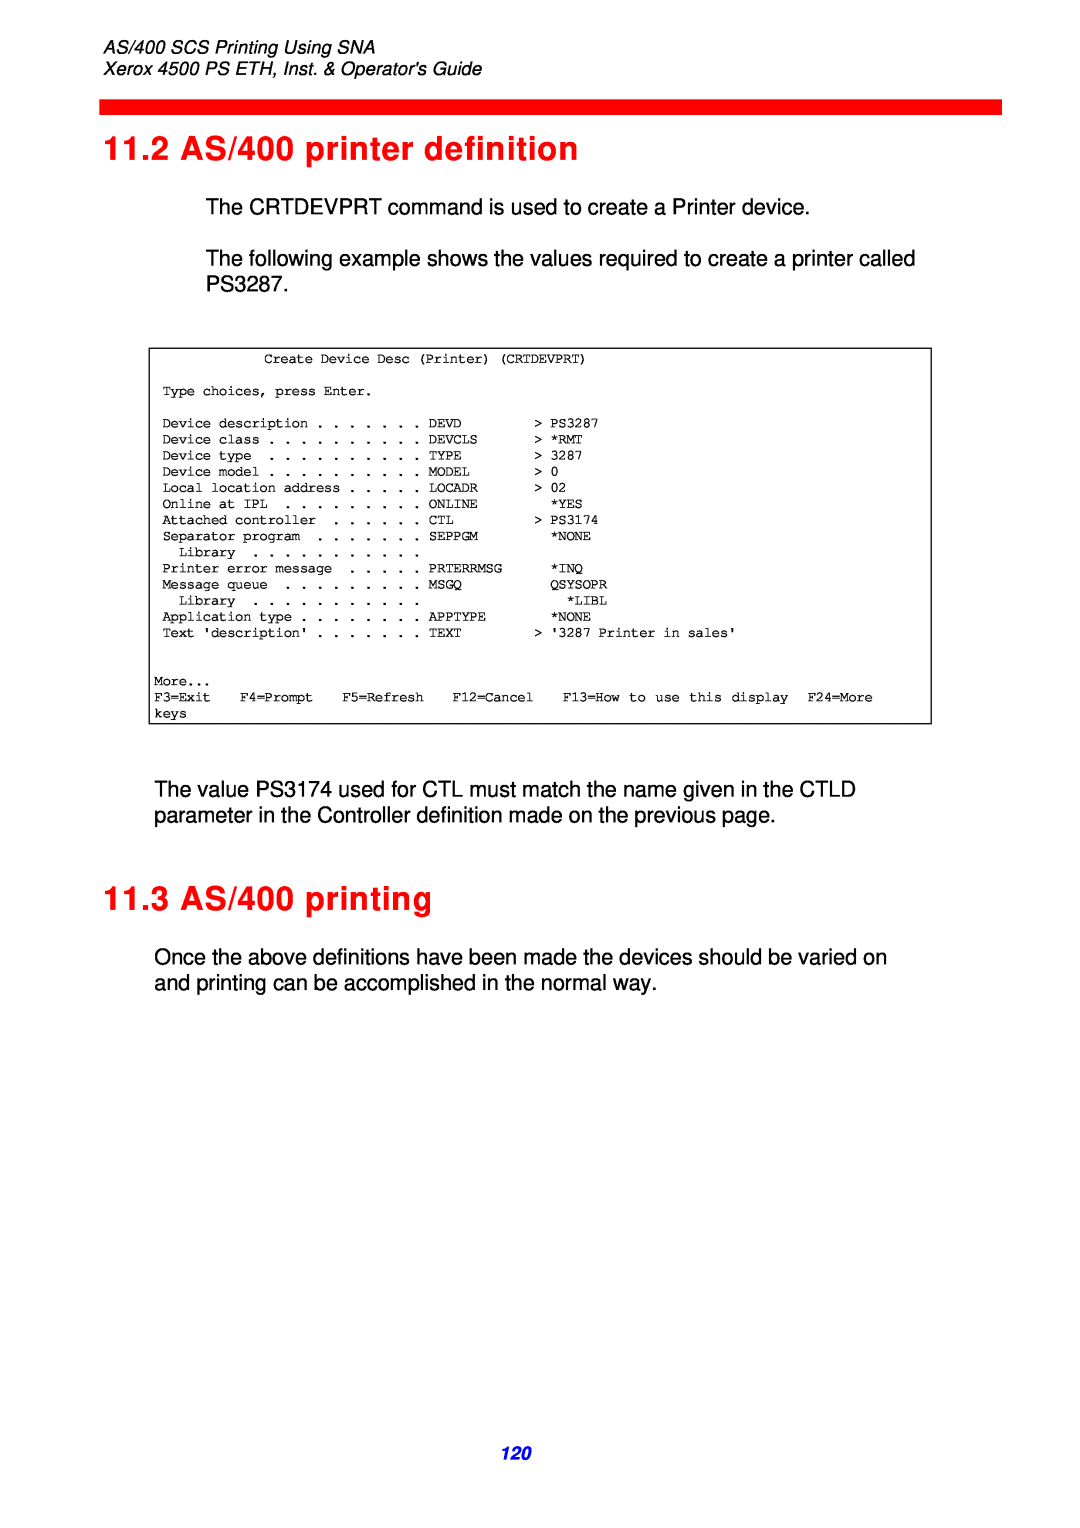 Xerox 4500 ps eth instruction manual 11.2 AS/400 printer definition, 11.3 AS/400 printing 